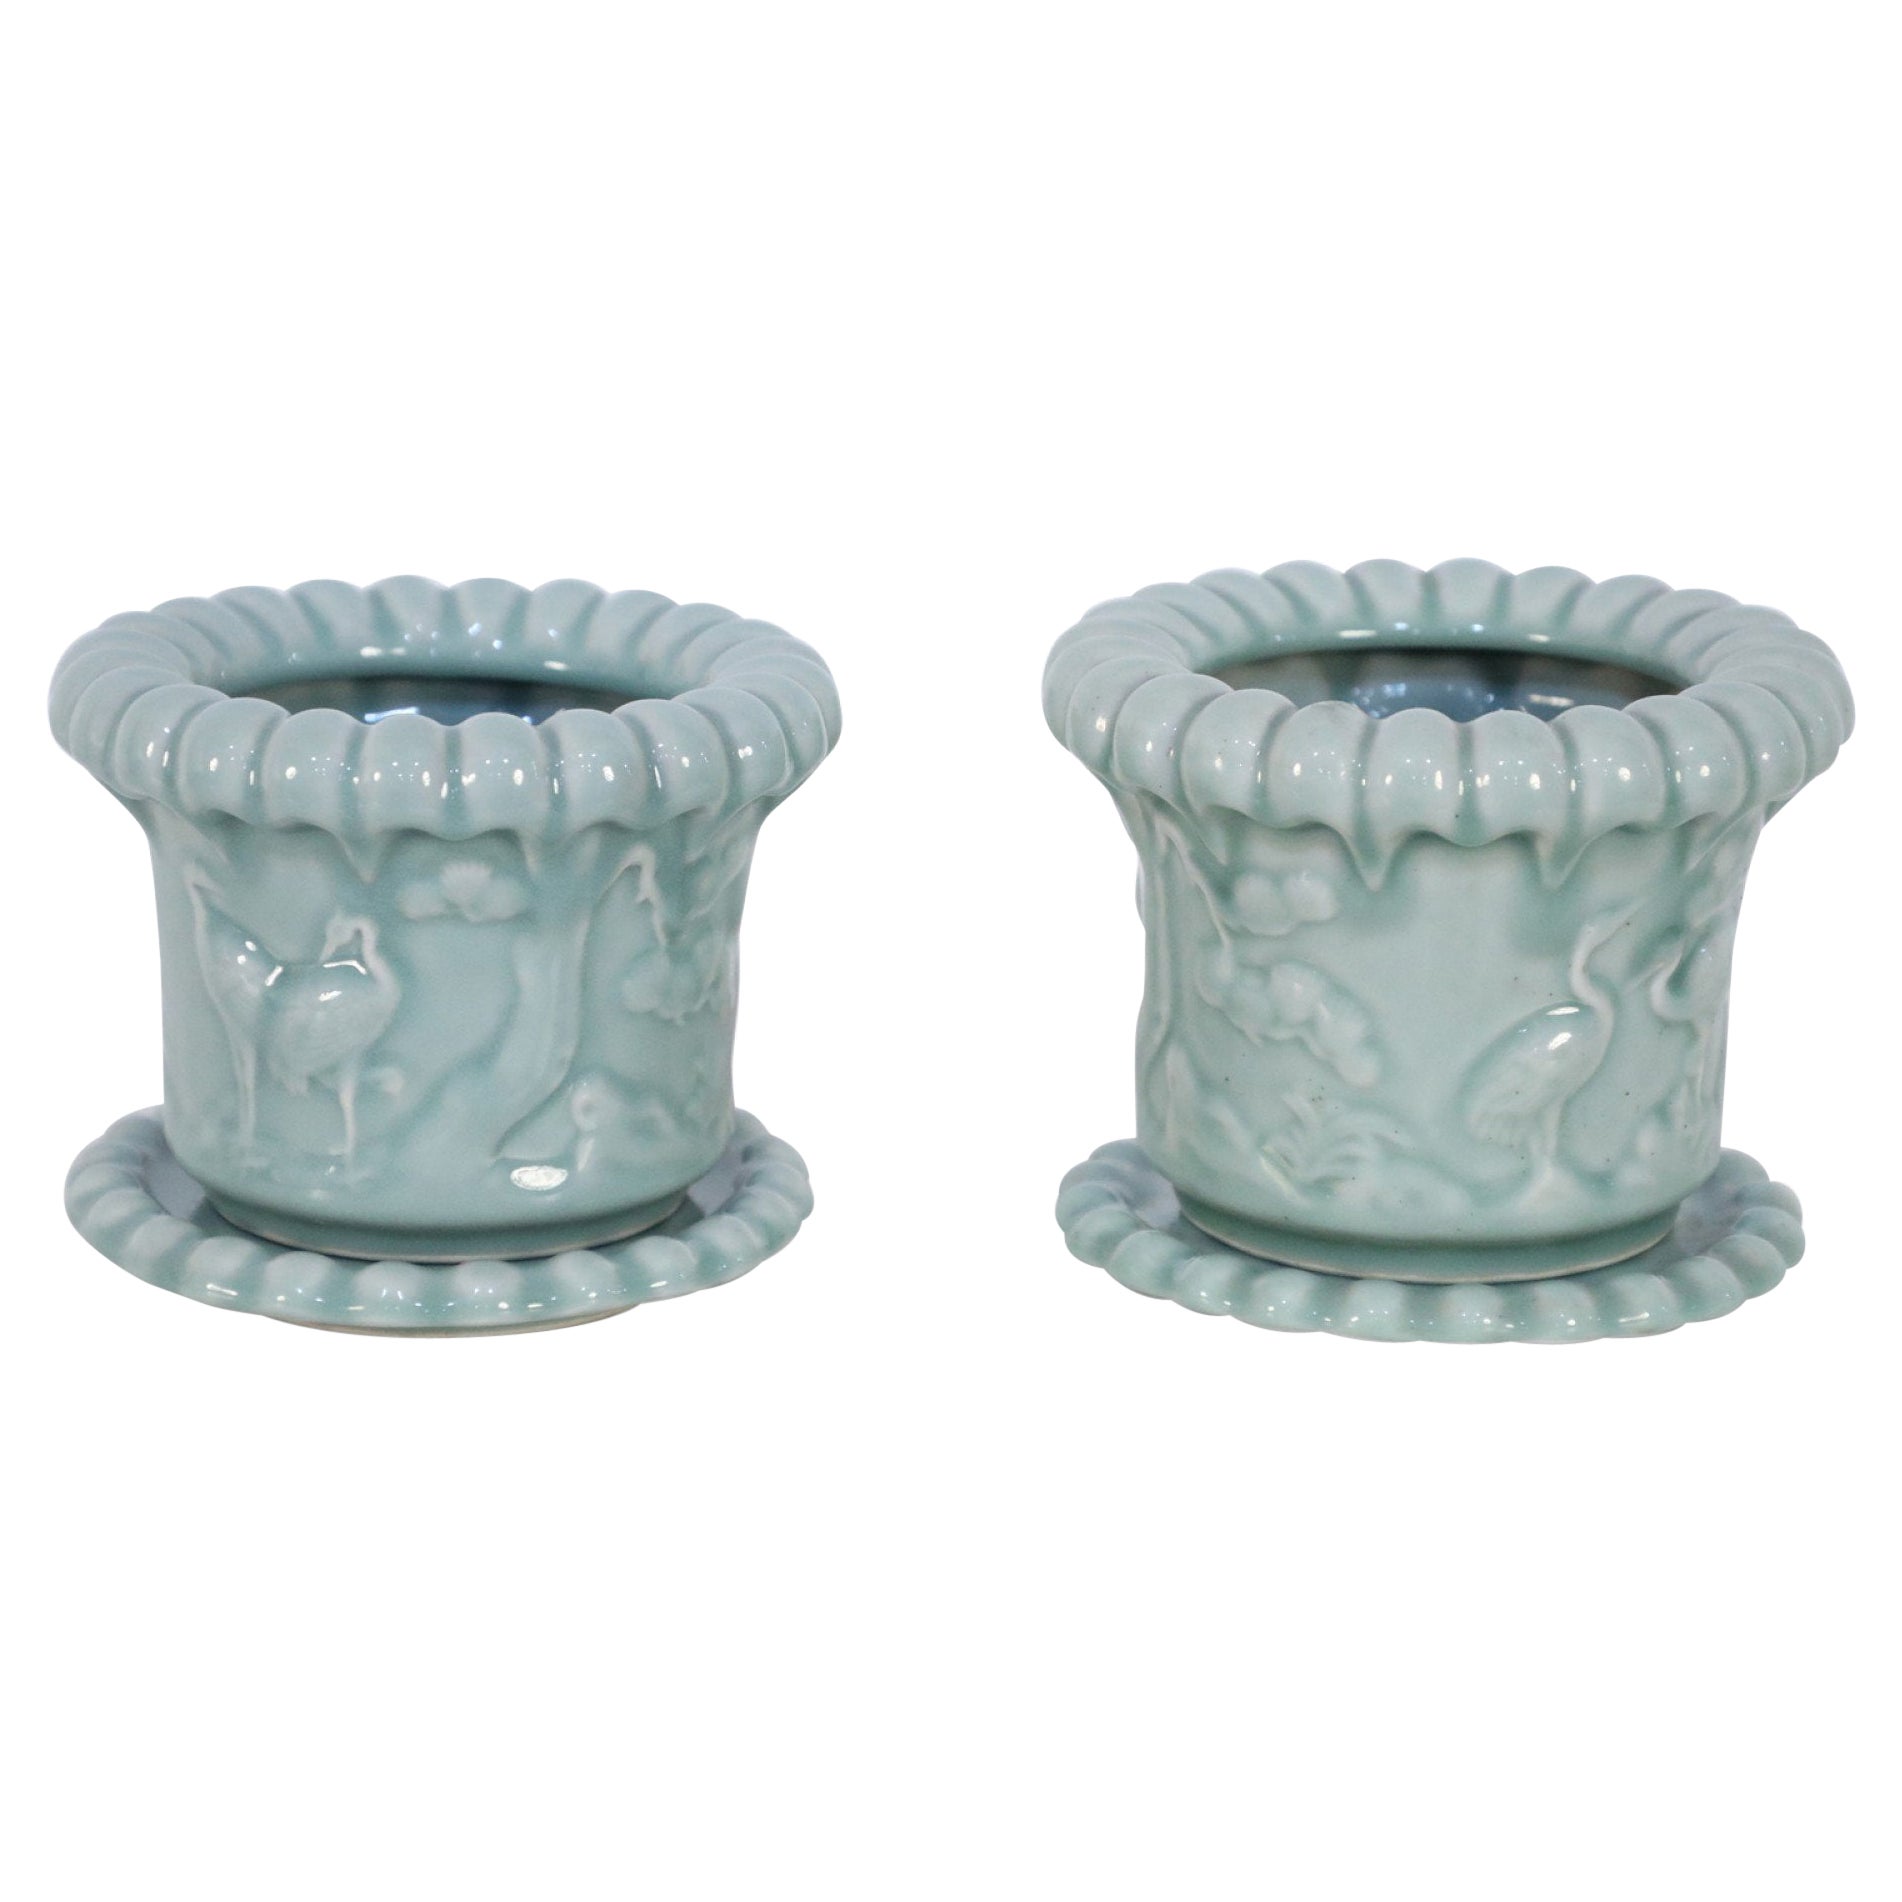 Pair of Chinese Celadon Scalloped Pots